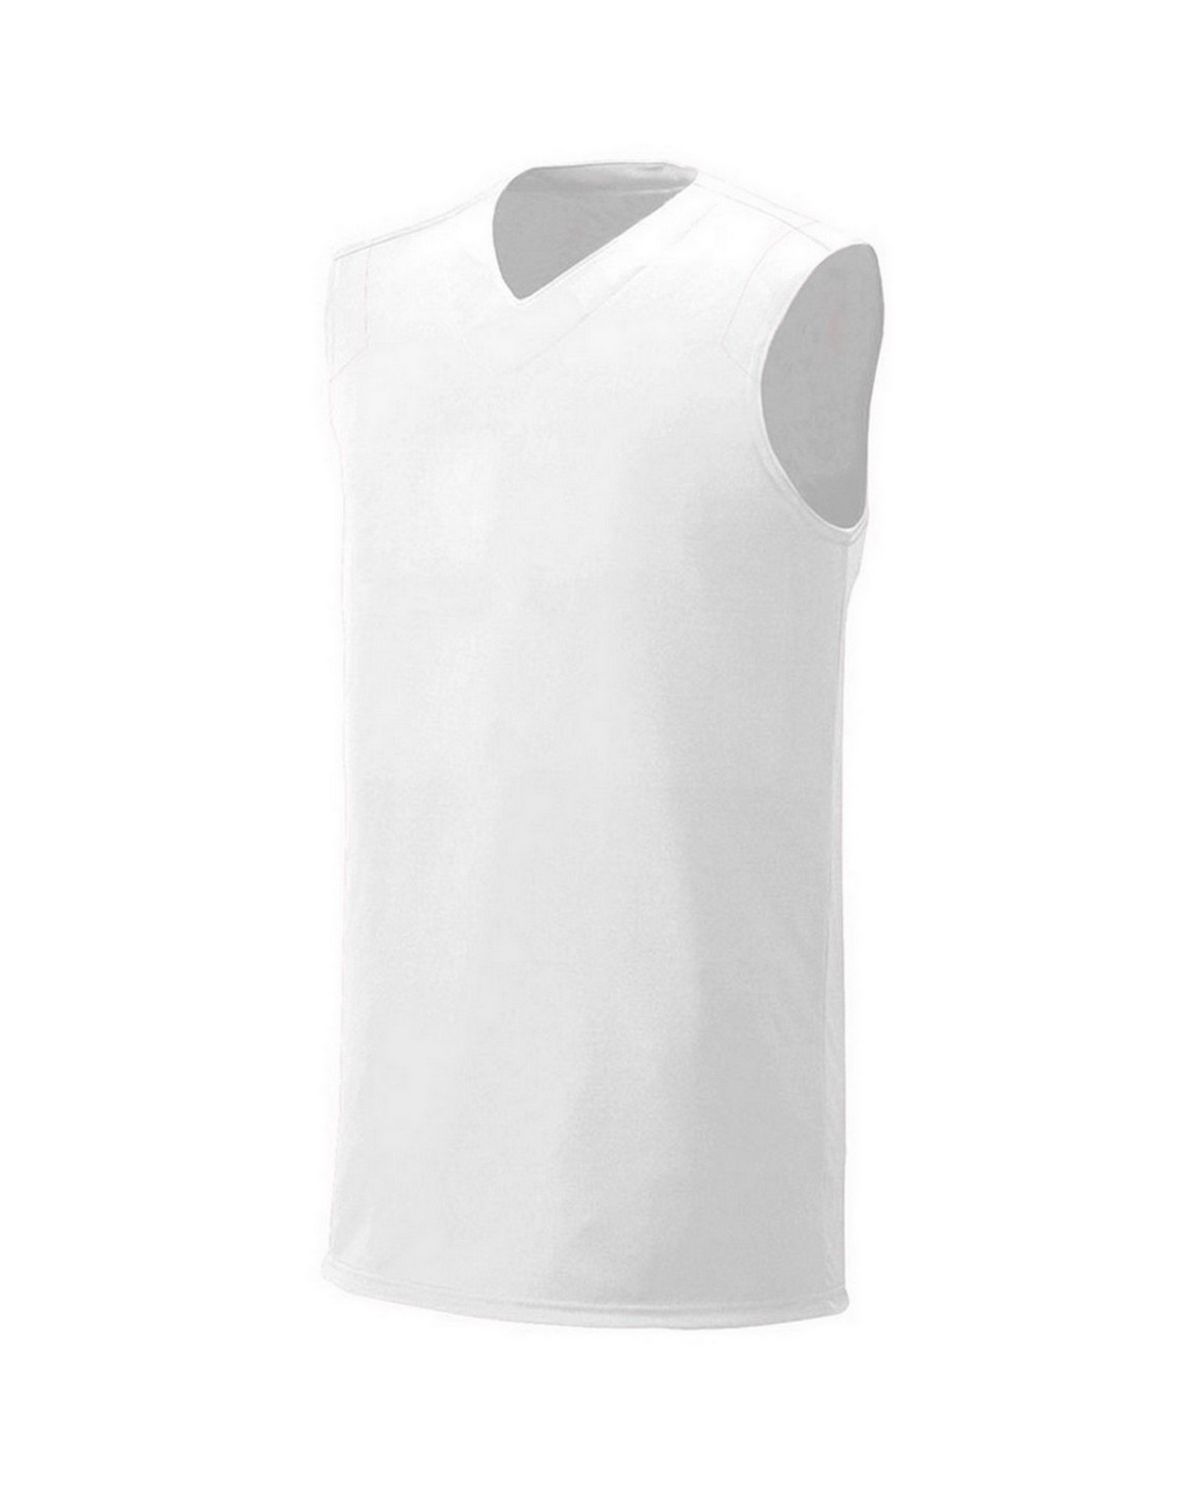 A4 NB2340 Youth Moisture Management V neck Muscle